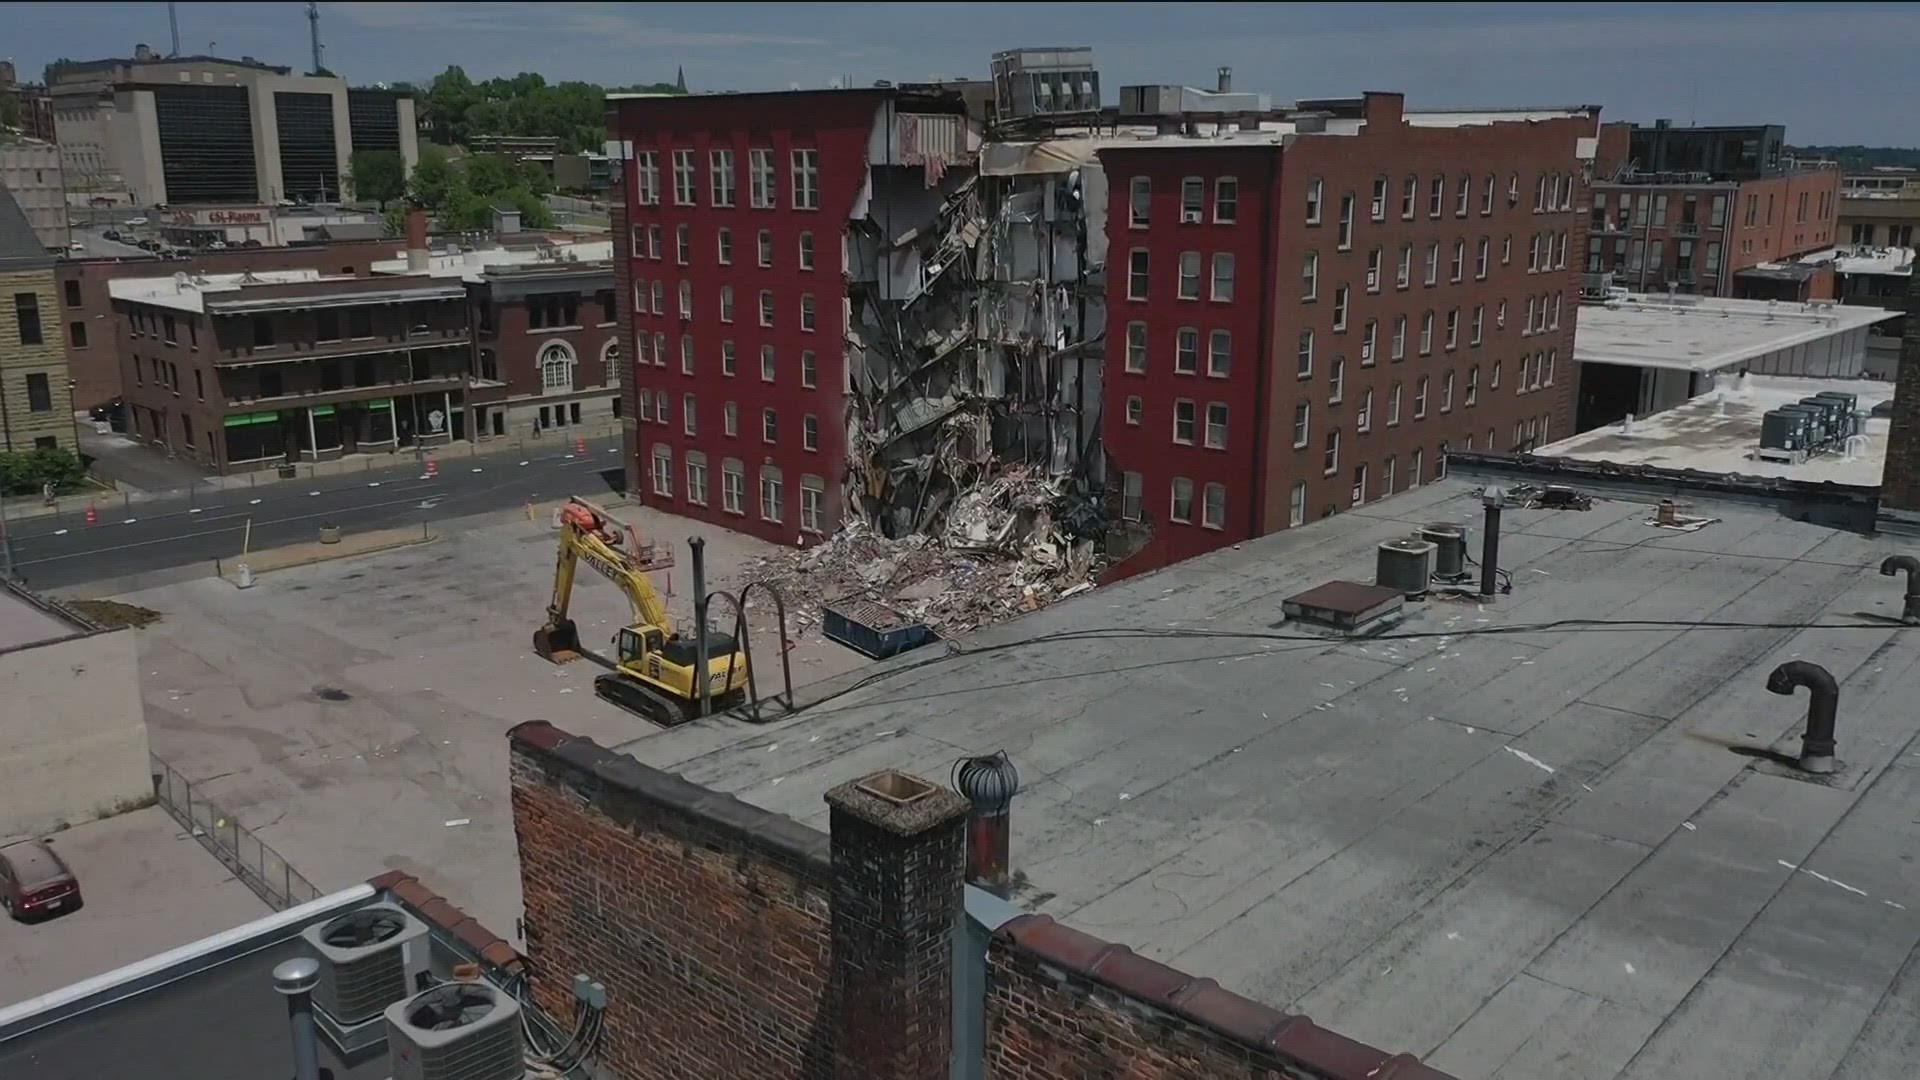 The six-story building was deemed unsafe and would be demolished.